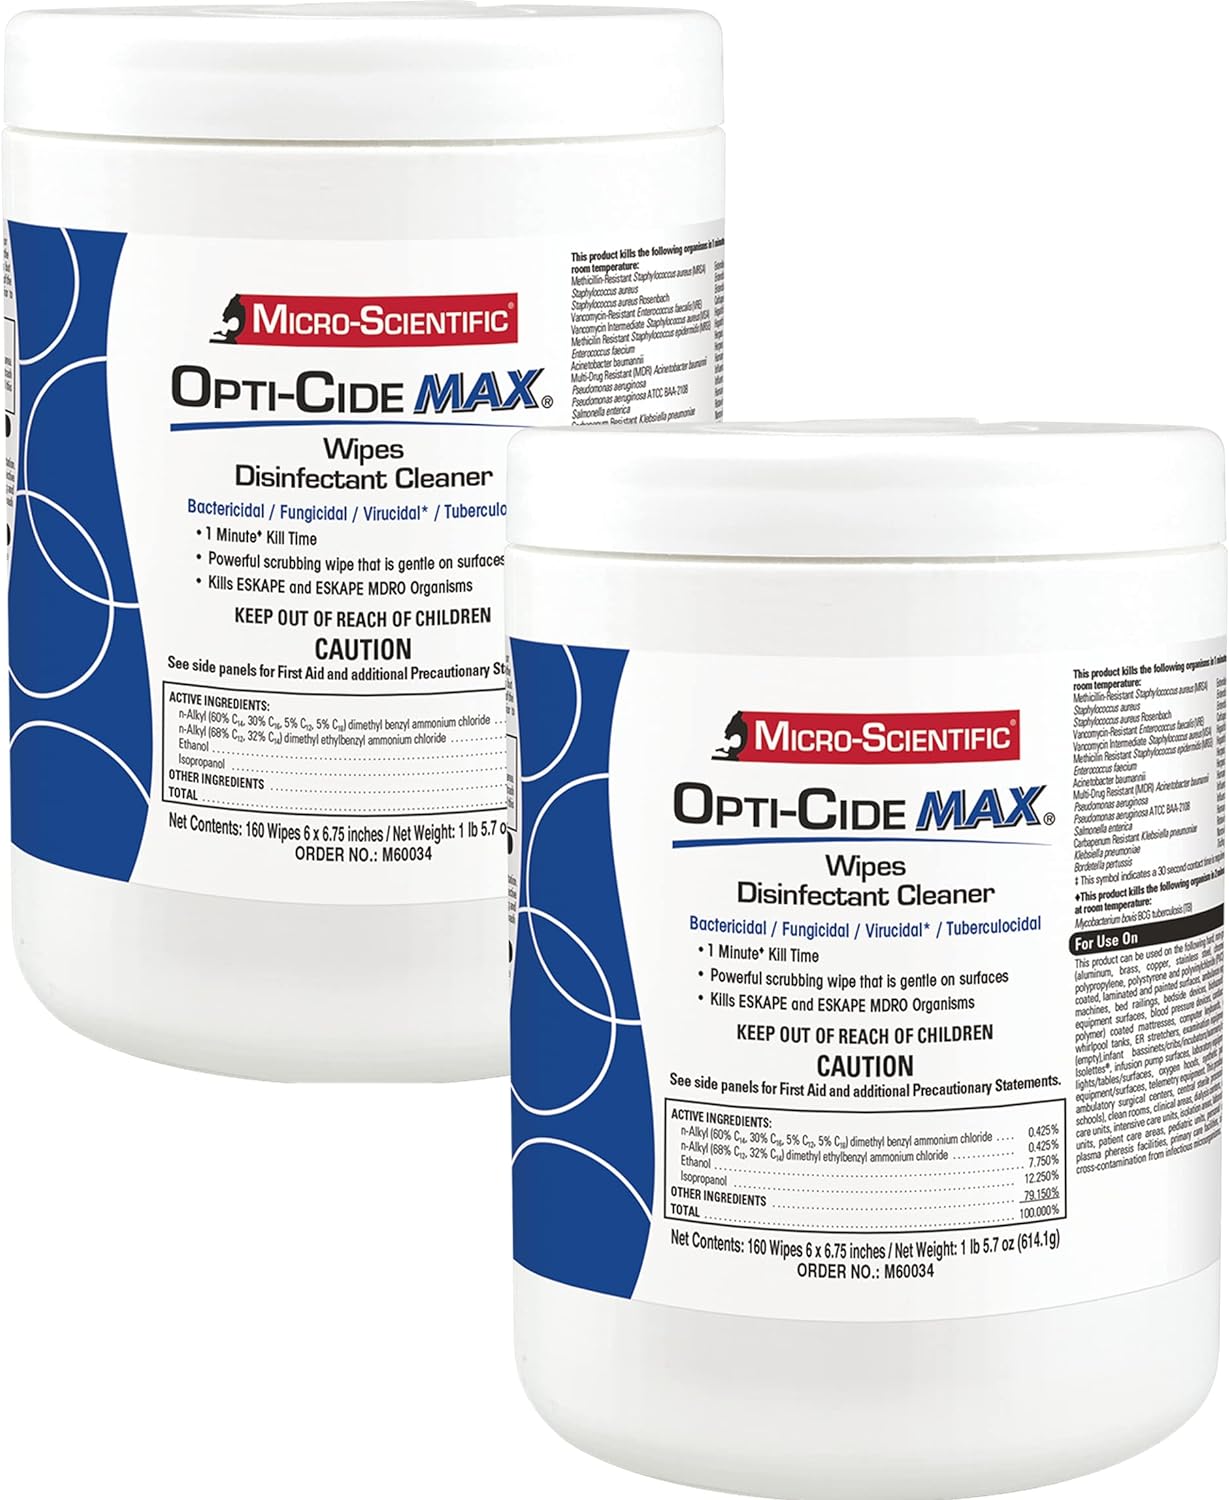 Micro-Scientific Opti-Cide Max Disinfecting Wipes (2 Pack) - 320 Wipes